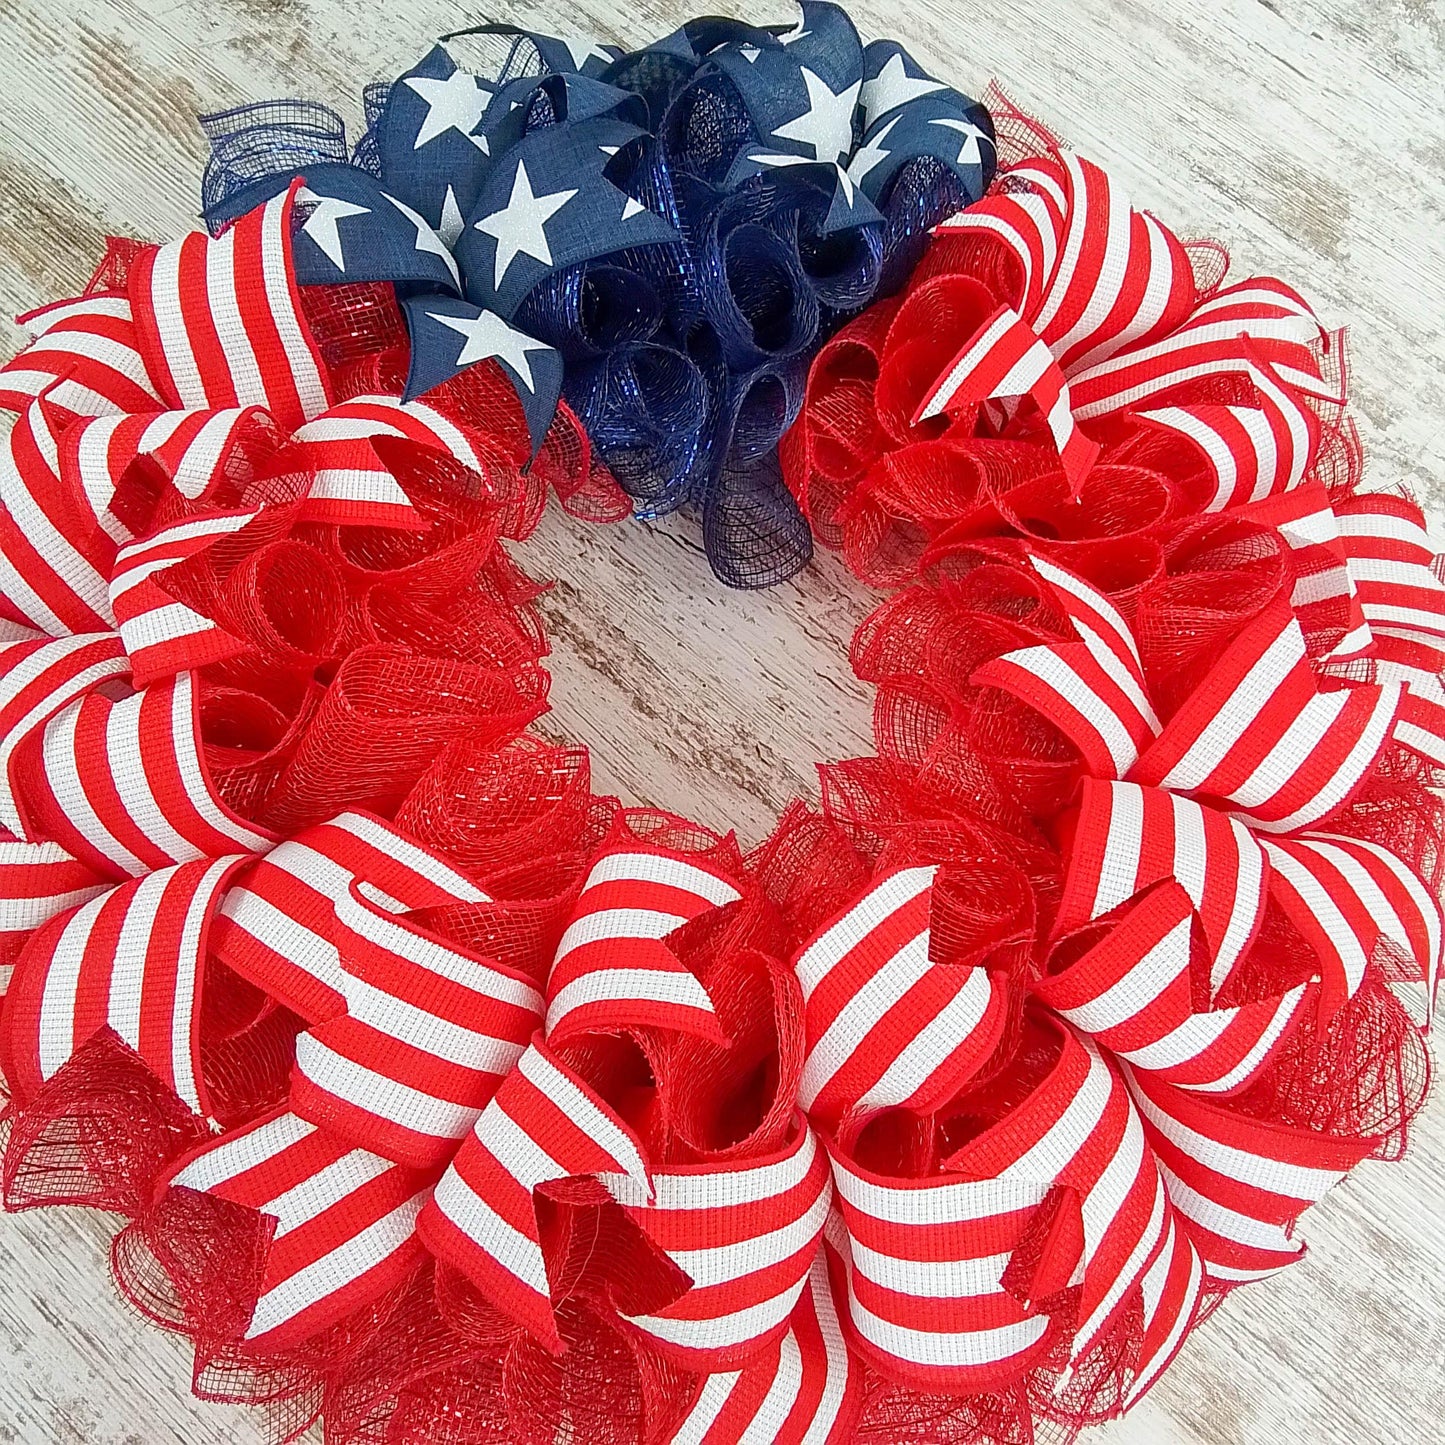 Patriotic Wreath, Flag Wreaths for Front Door, Americana Porch Decorations, Fourth of July Mesh Door Wreaths - Red White Royal Blue Stars Stripes - Pink Door Wreaths